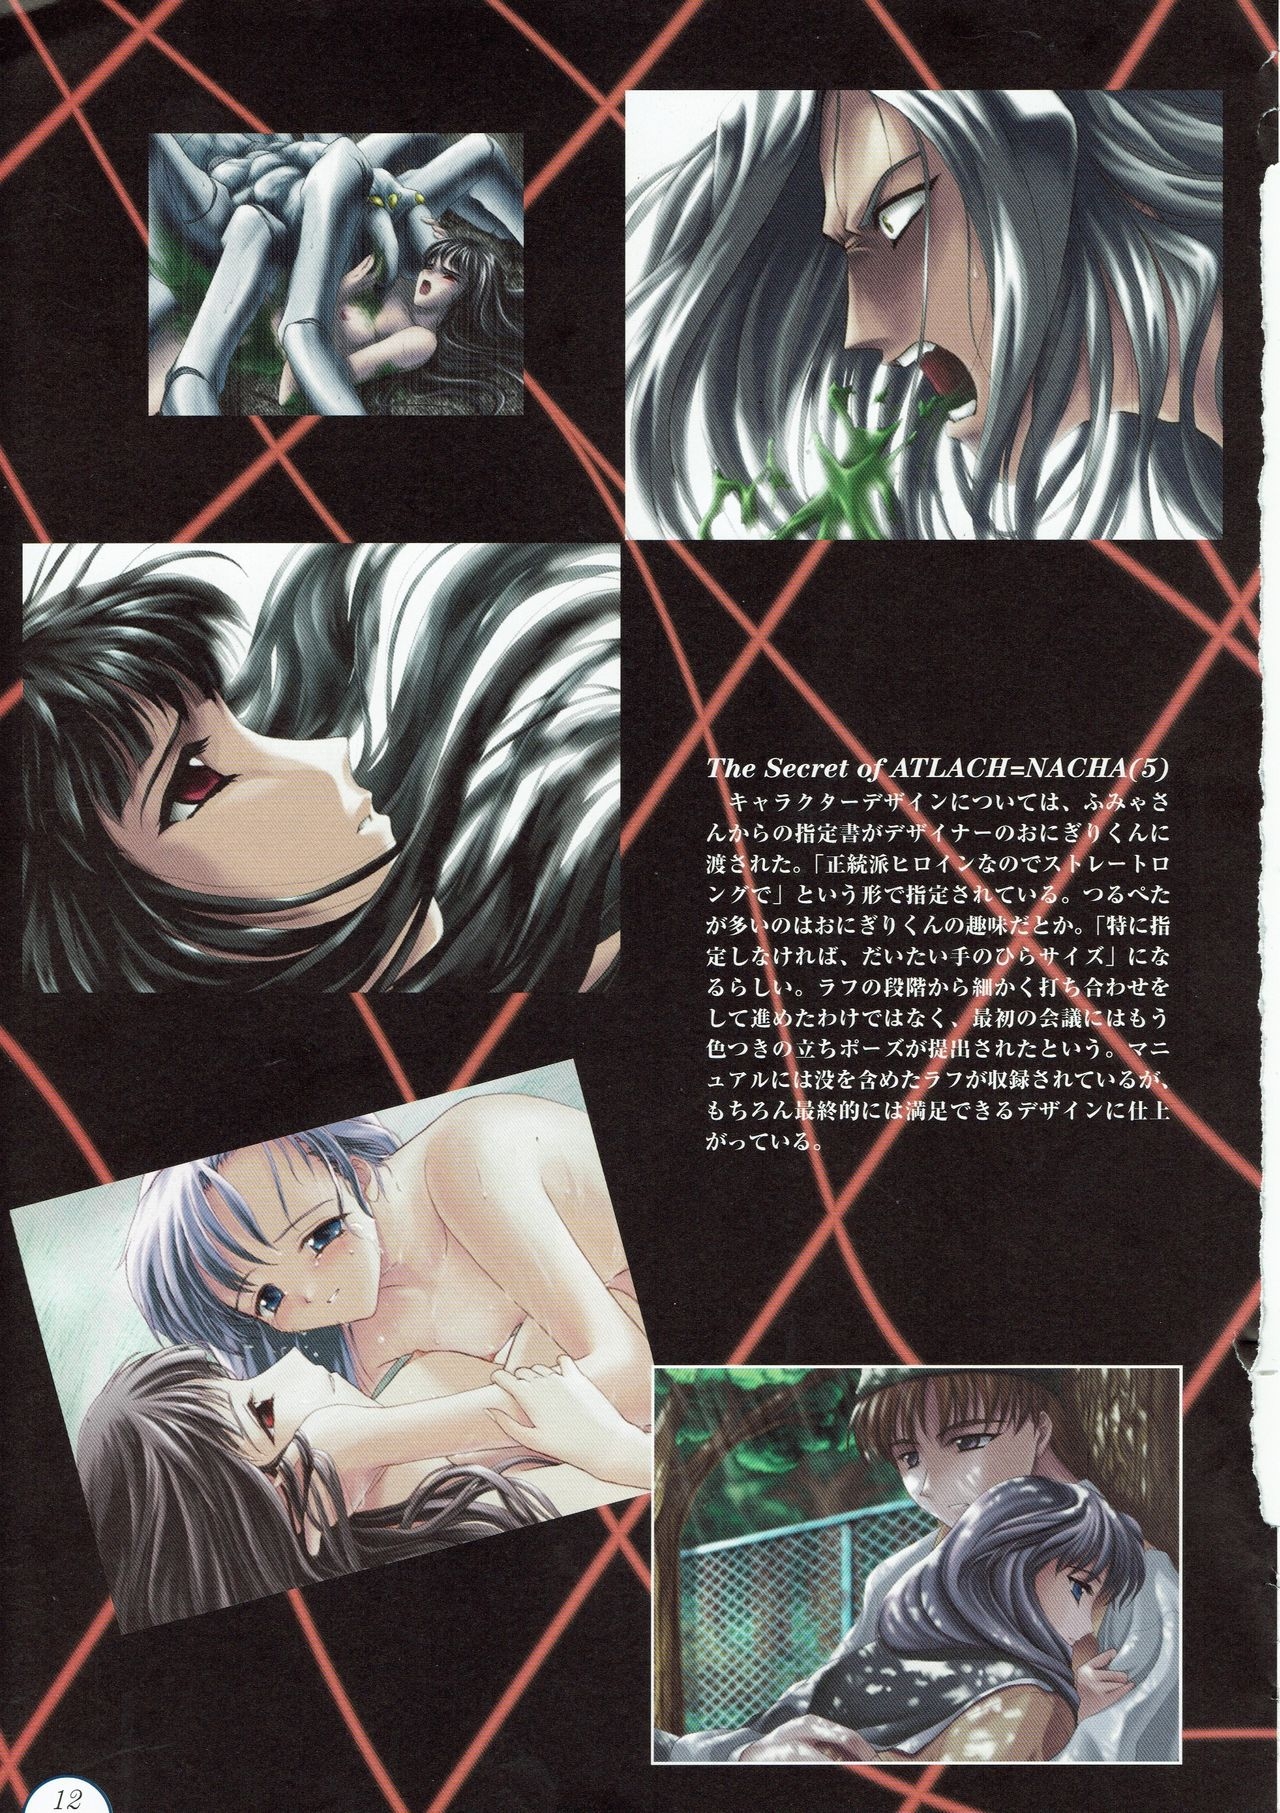 Alice no Yakata 456 Official Guide 13